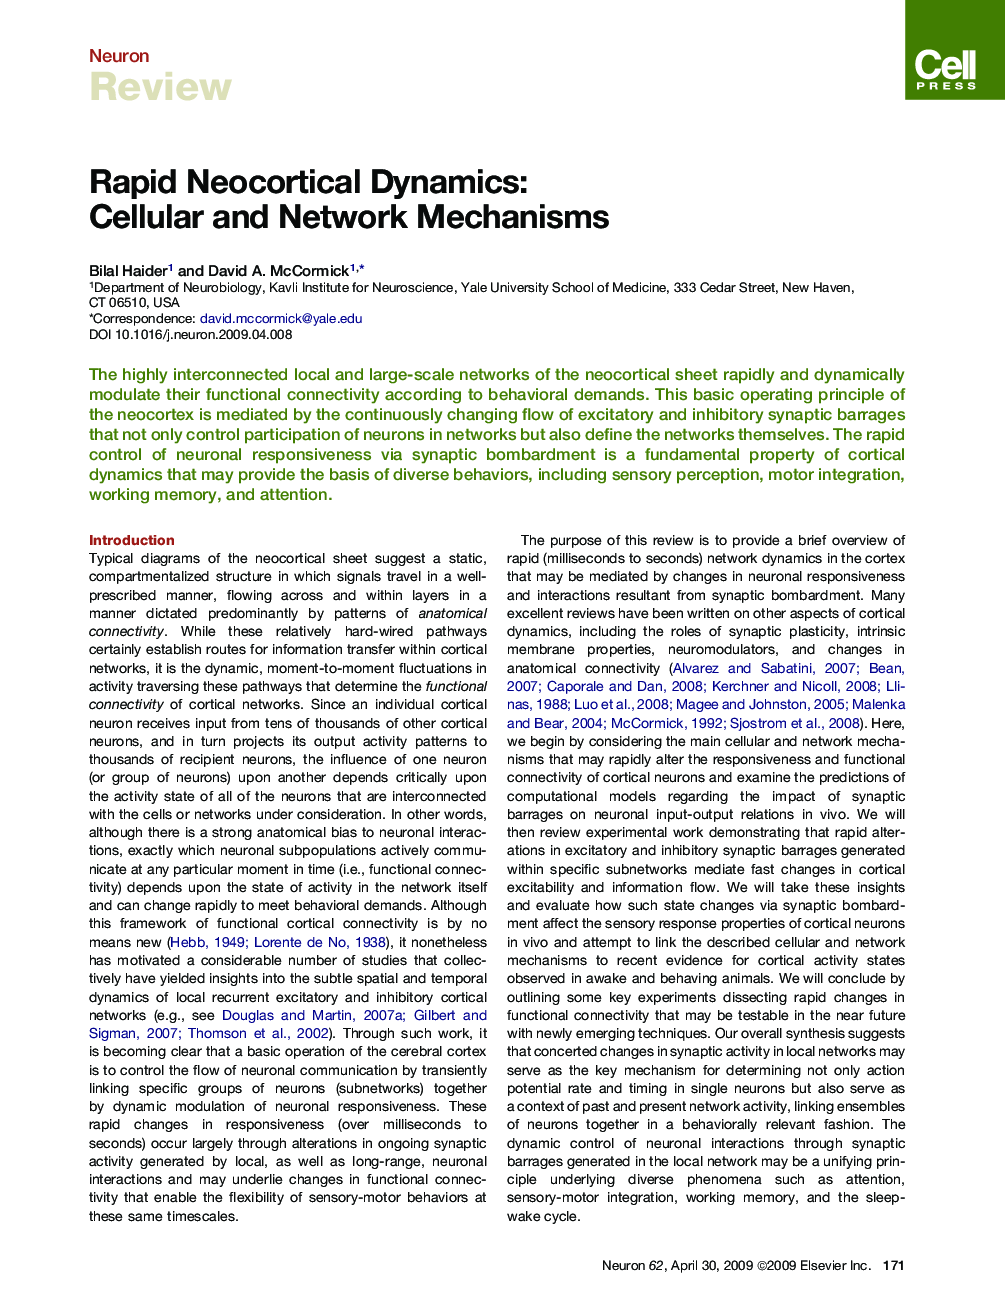 Rapid Neocortical Dynamics: Cellular and Network Mechanisms